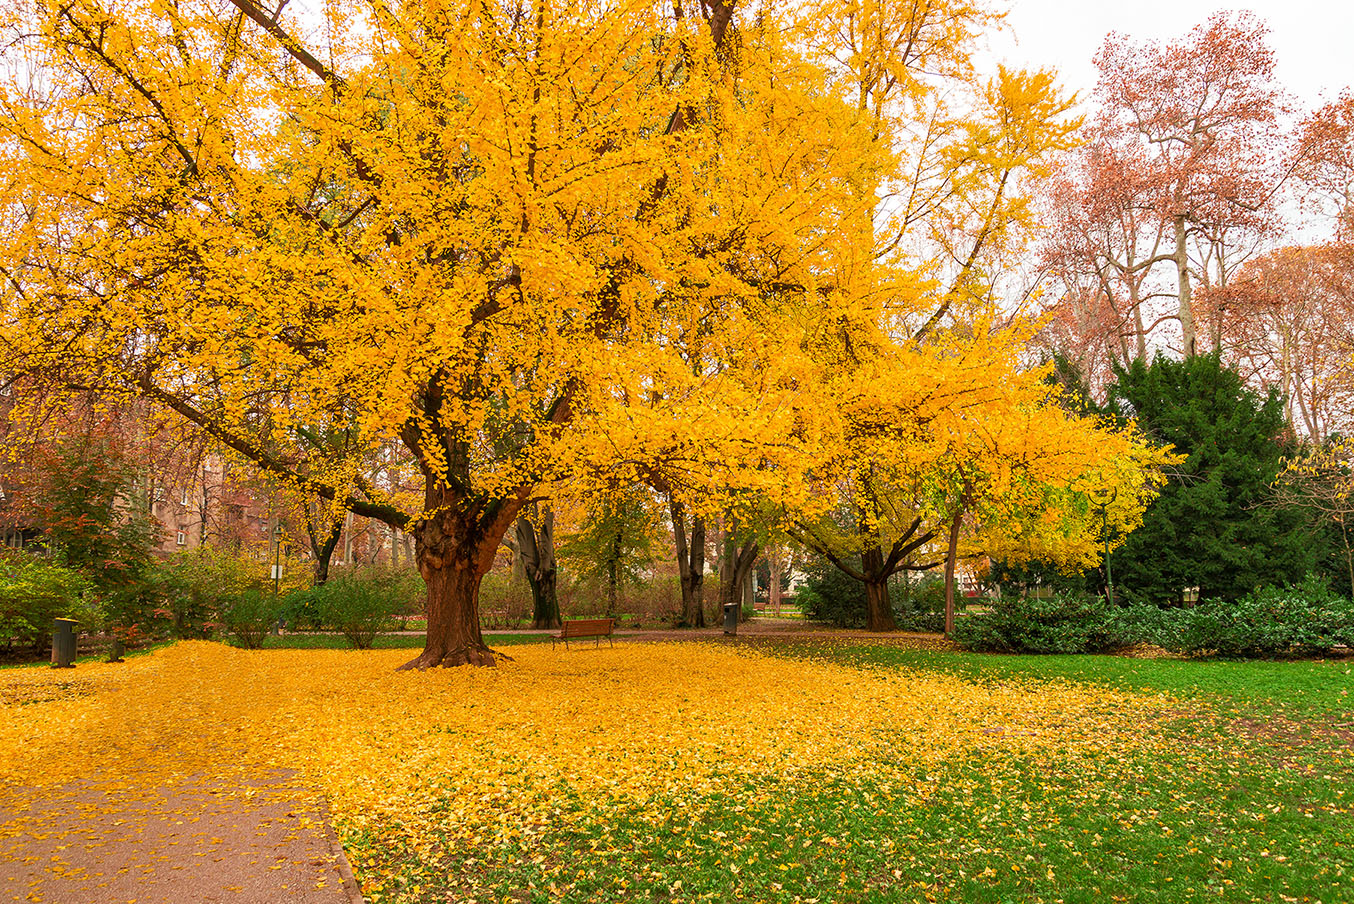 Gingko tree during autumn just before losing leaves